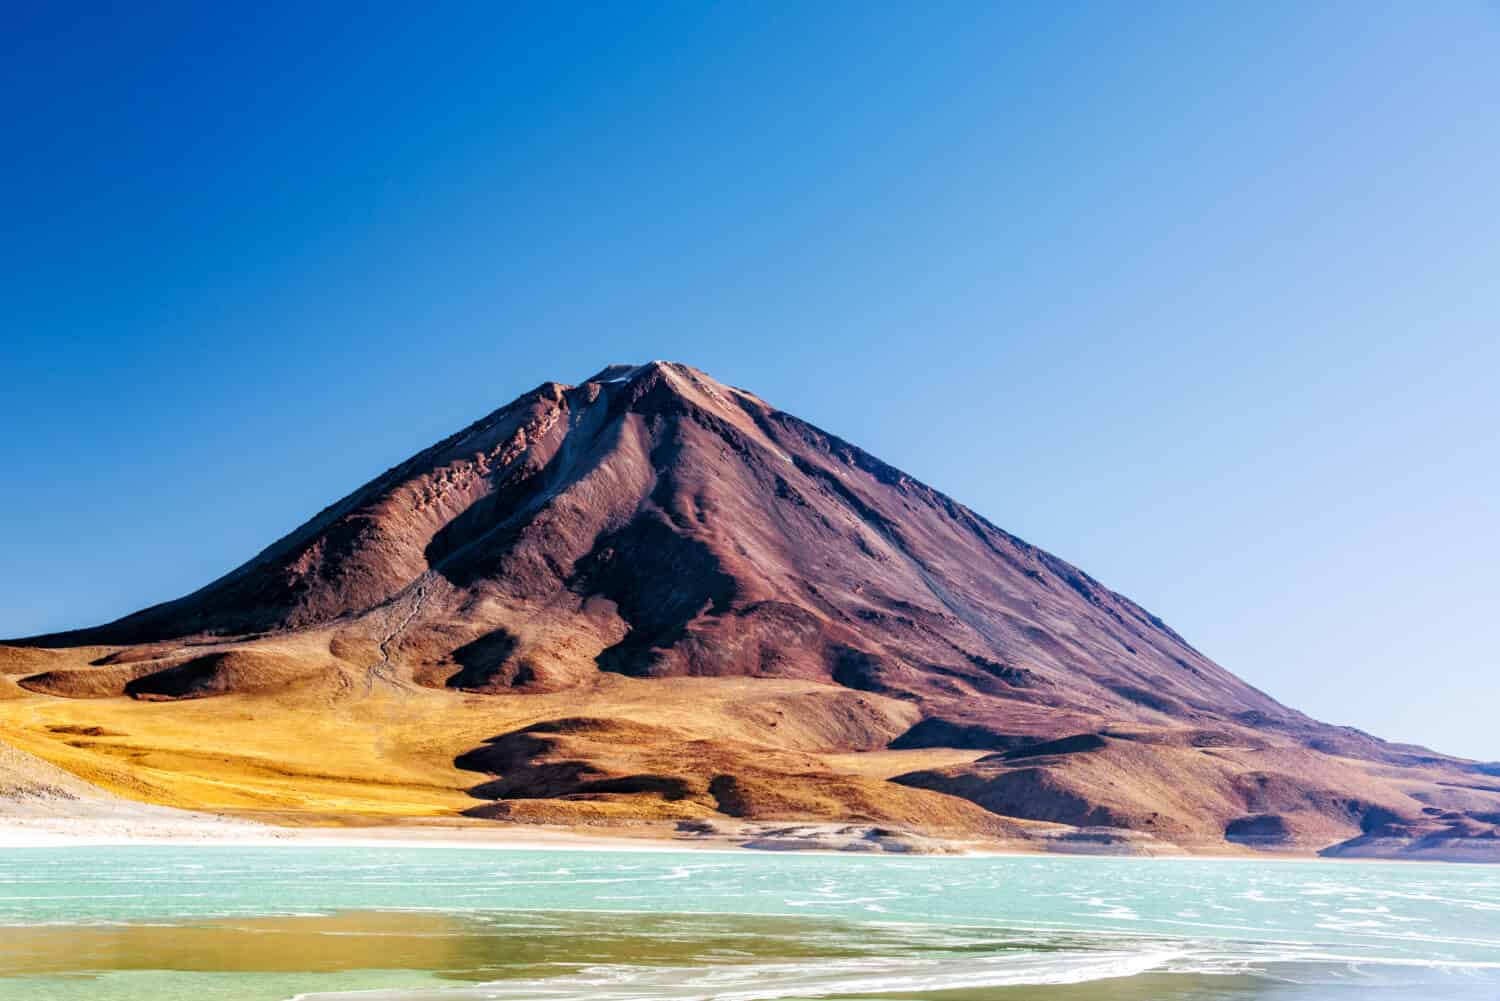 View of Licancabur Volcano and the emerald green Laguna Verde on the border of Chile and Bolivia